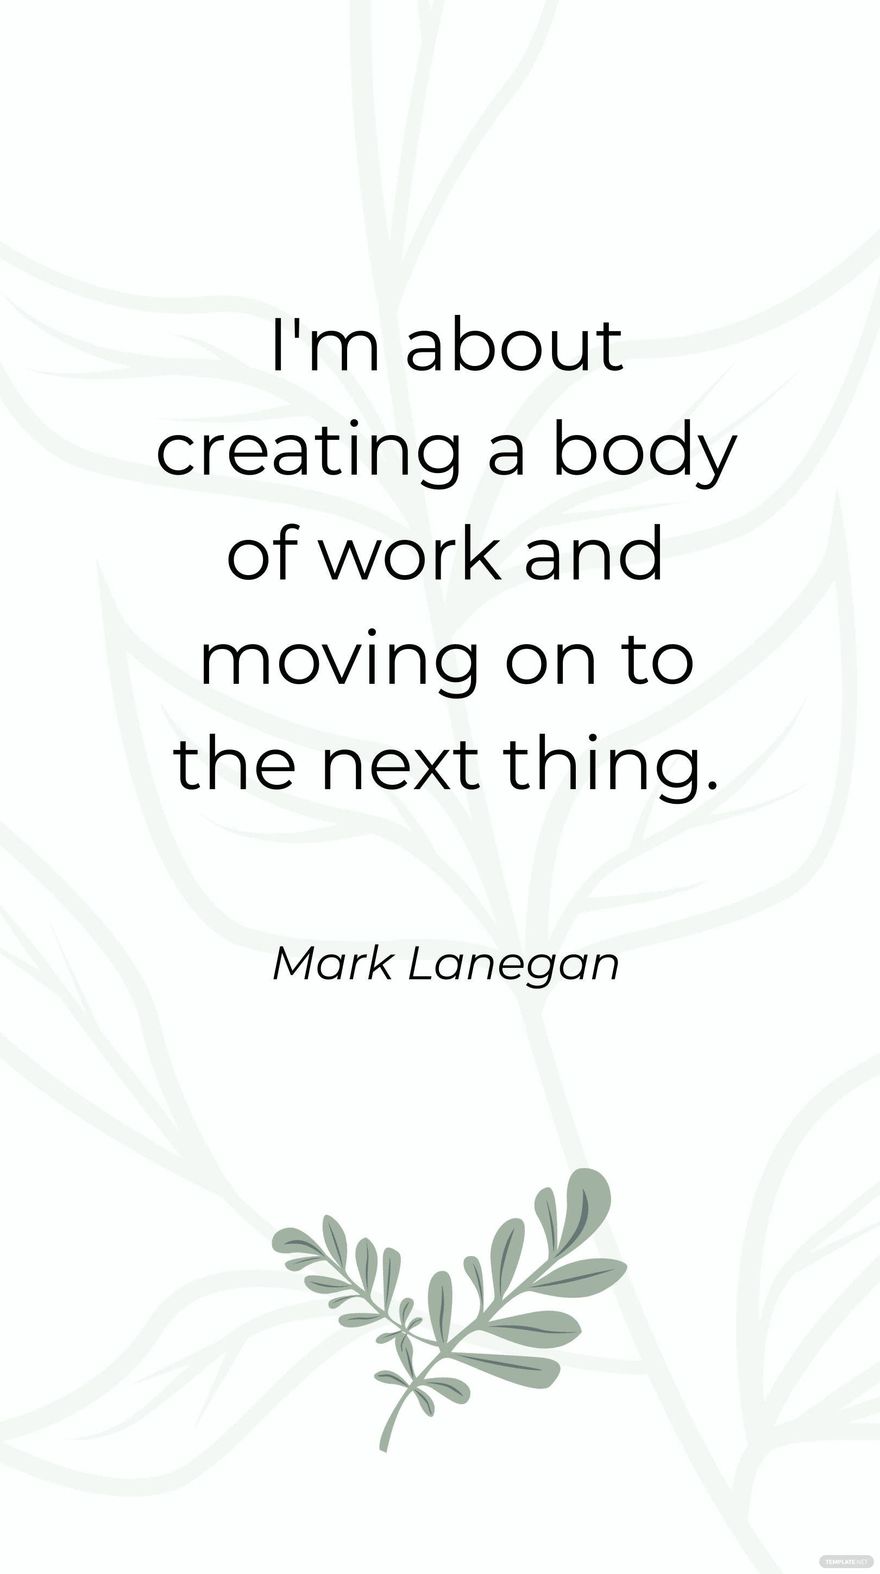 Mark Lanegan - I'm about creating a body of work and moving on to the next thing.